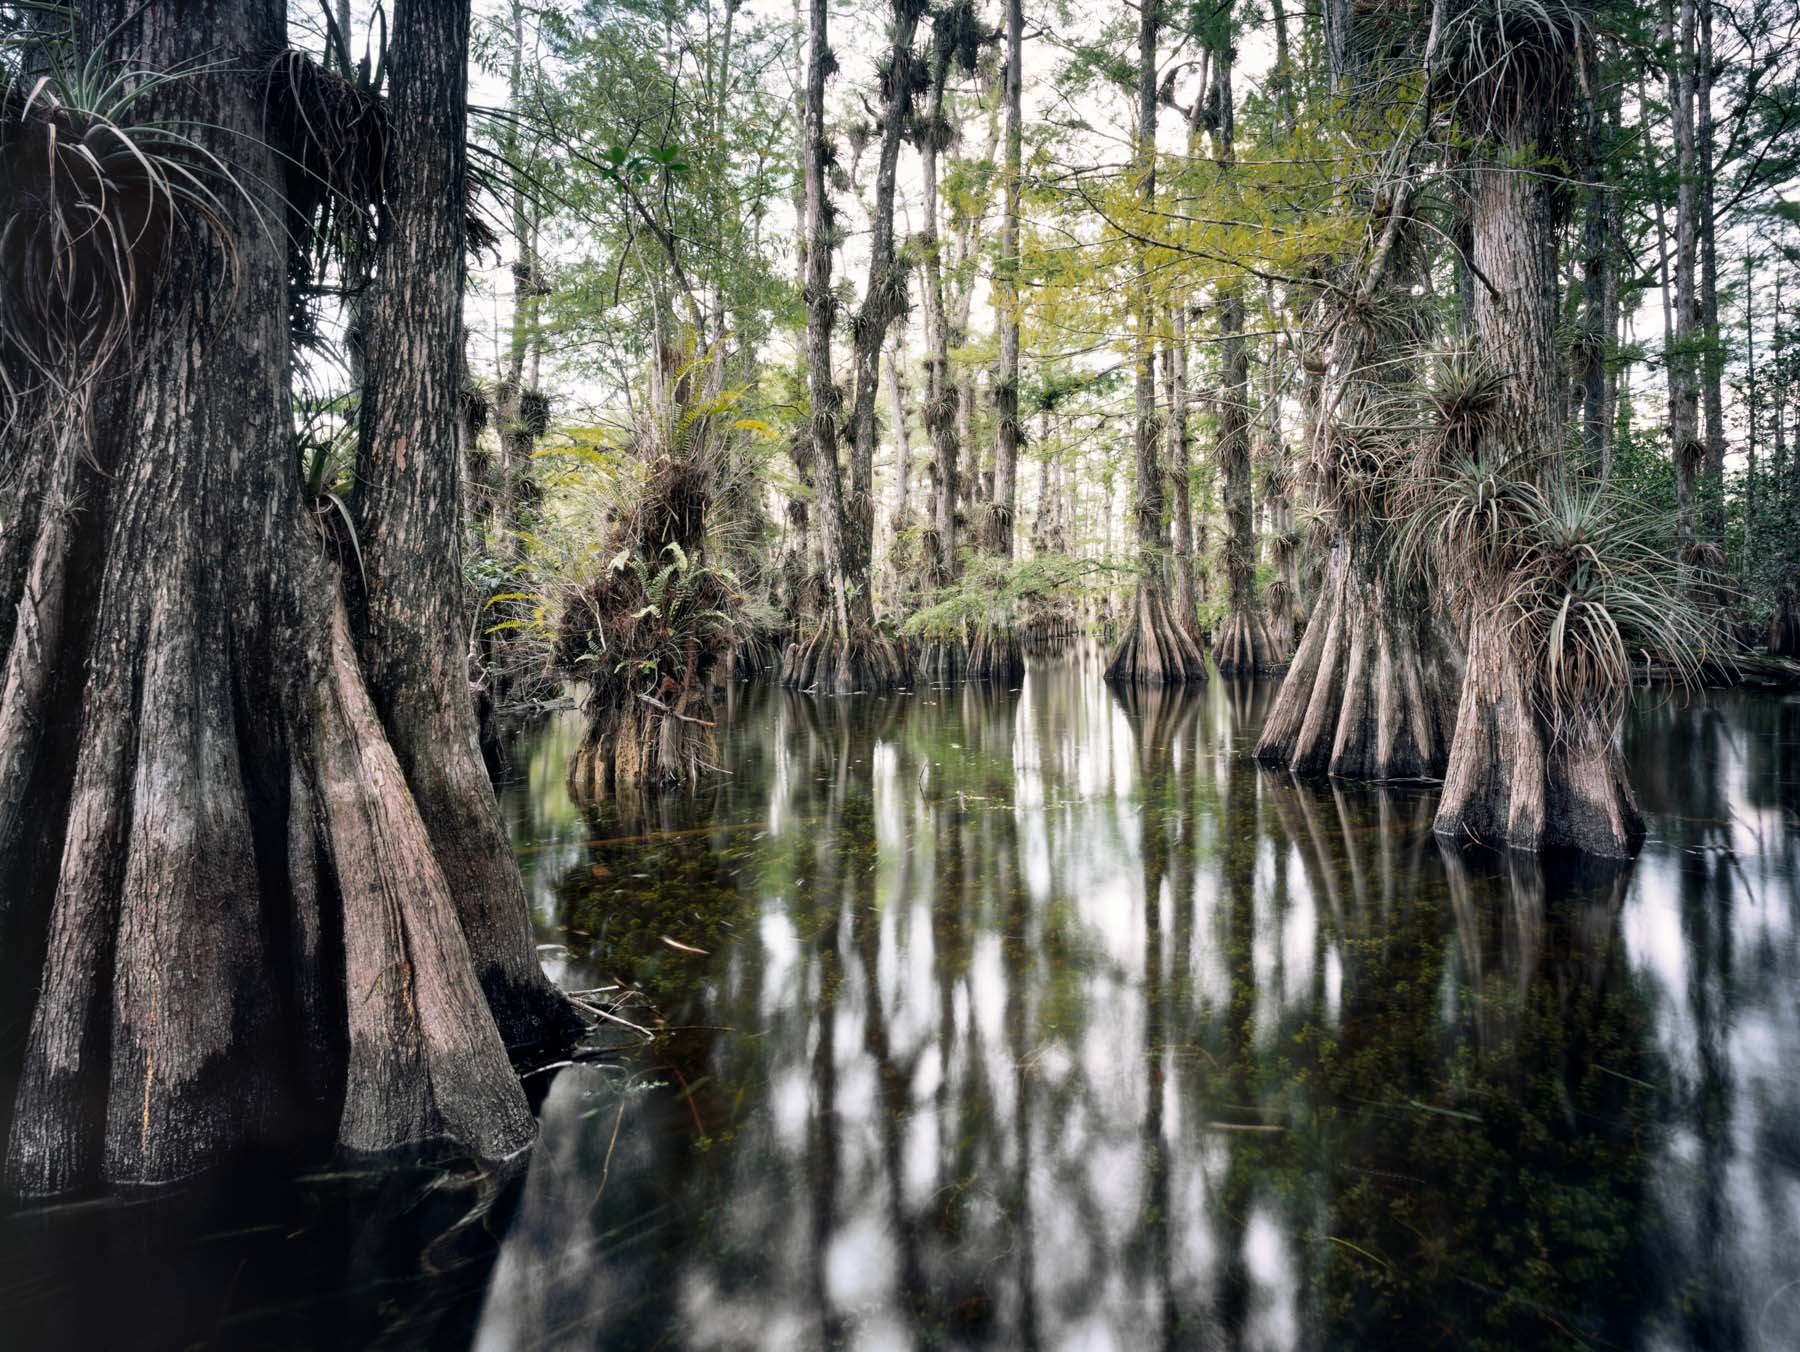 Gator Hook Dome #5 Gator Hook Dome is located in the Big Cypress preserve. This is one of my favorite examples of a classic Cypress...